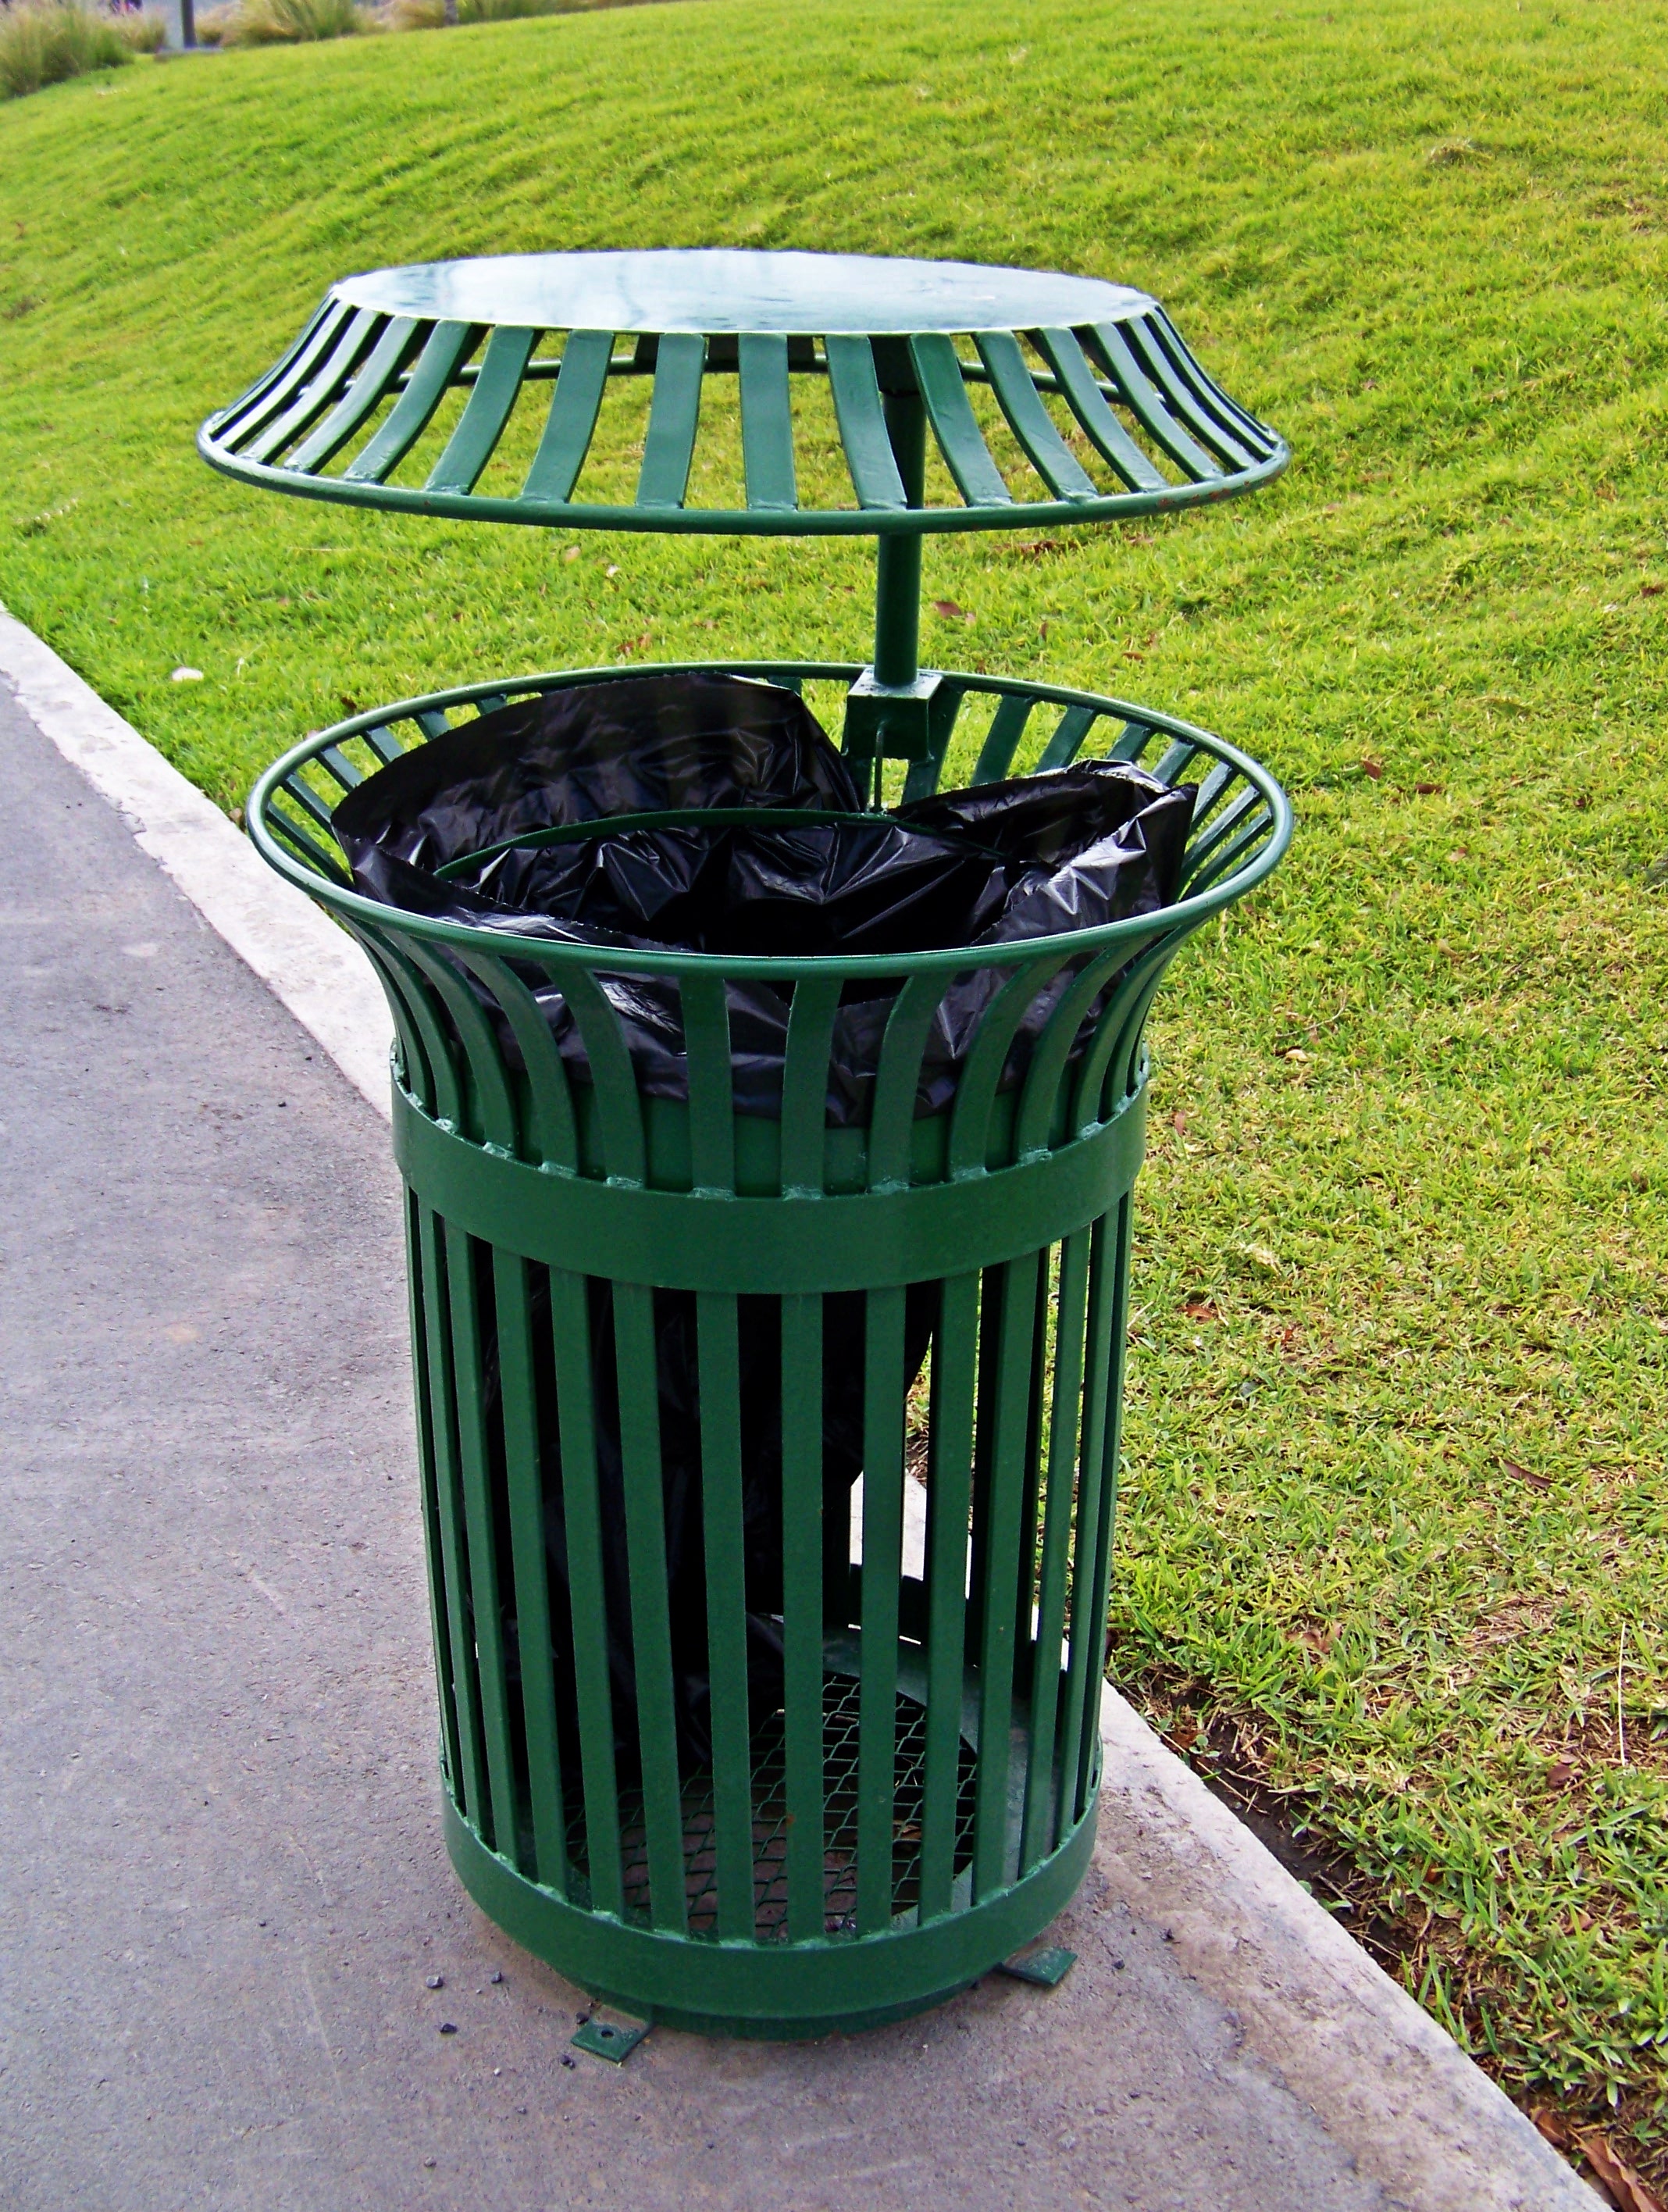 Free photo: Trash container - Away, Refuse, Object - Free Download - Jooinn